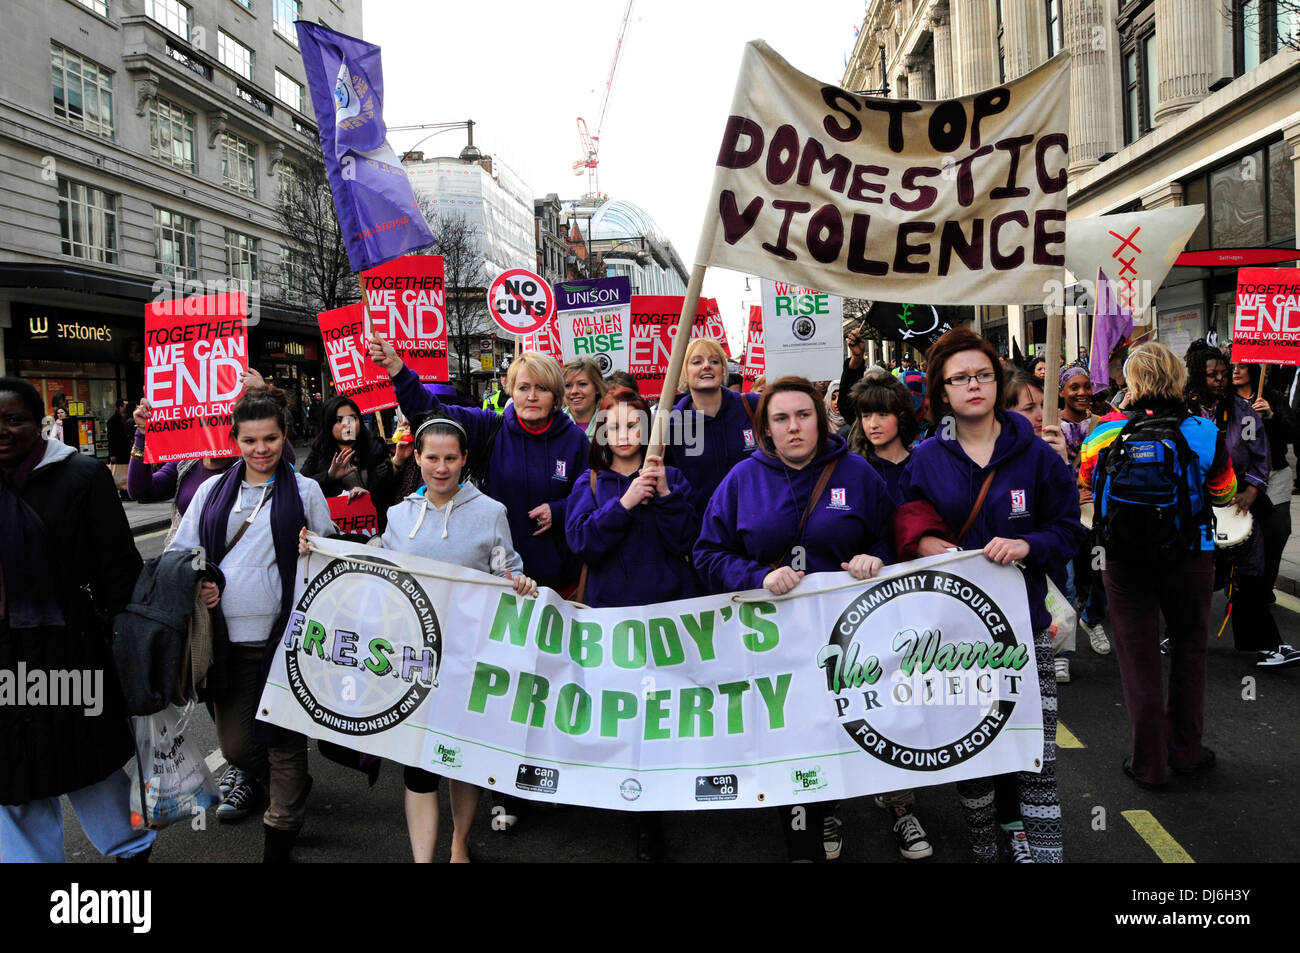 A group of women with banners march in central London, demanding an end to domestic violence against women, UK Stock Photo